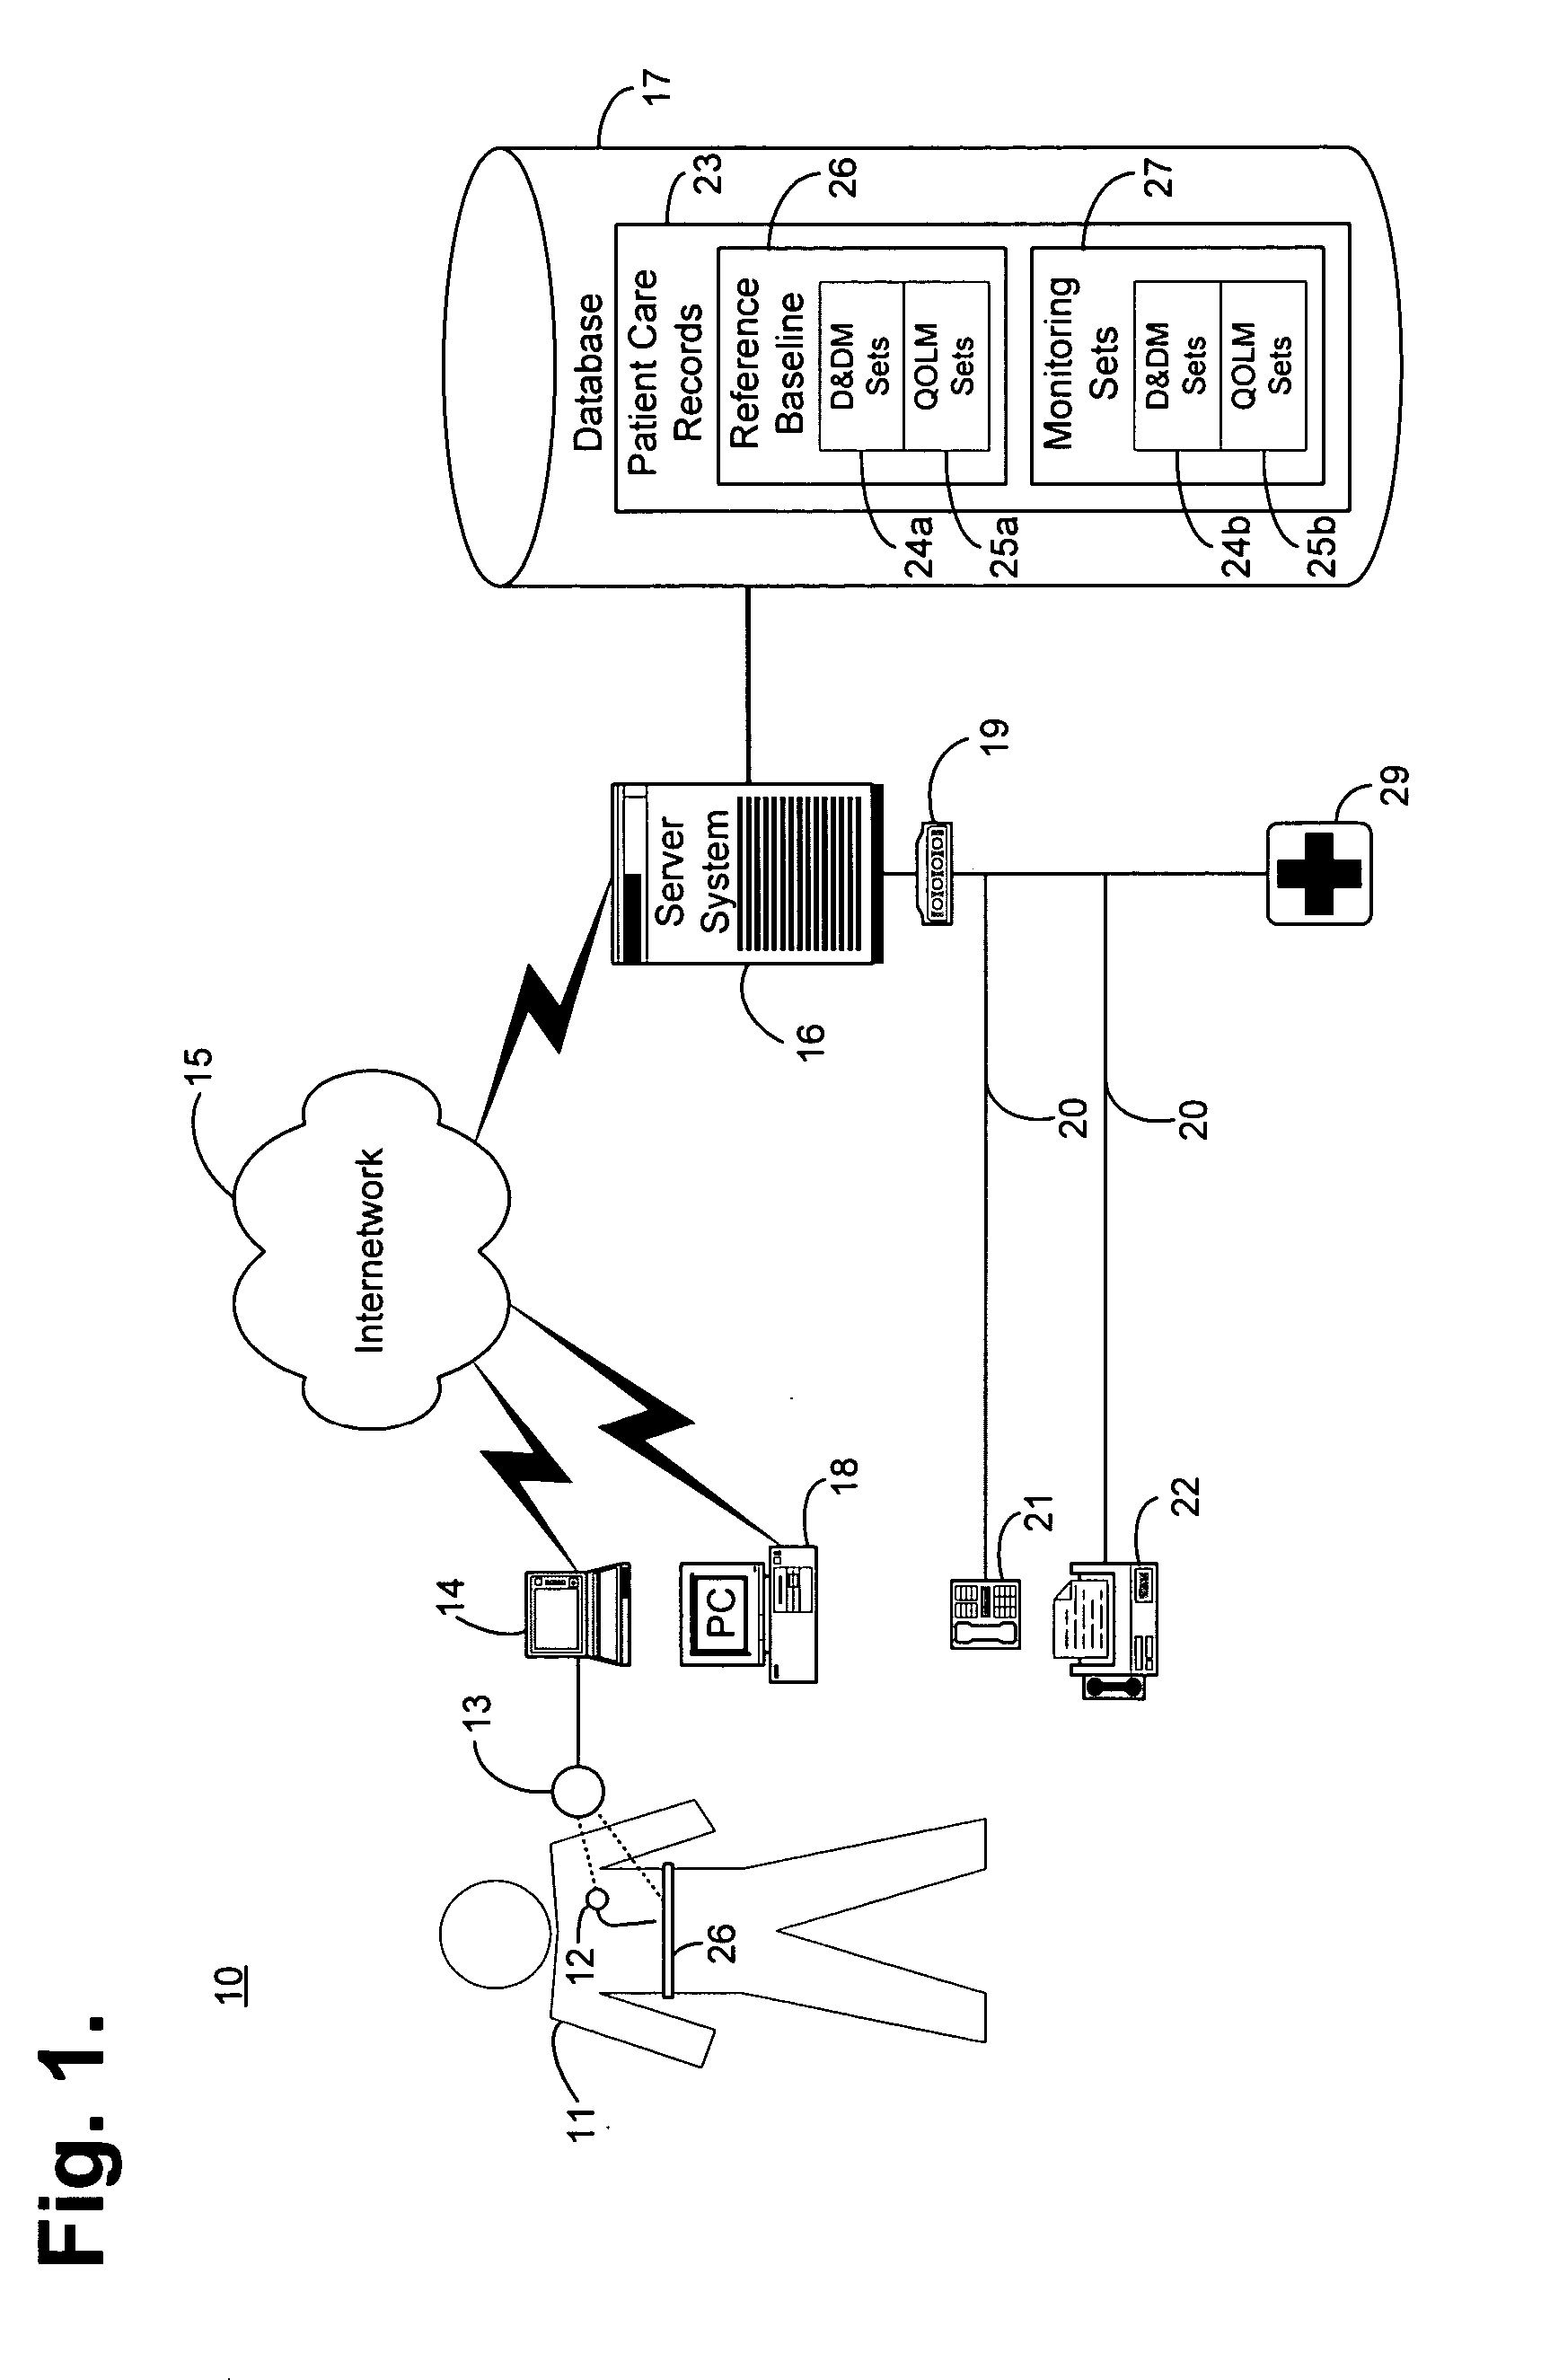 System and method for analyzing a patient status for atrial fibrillation for use in automated patient care